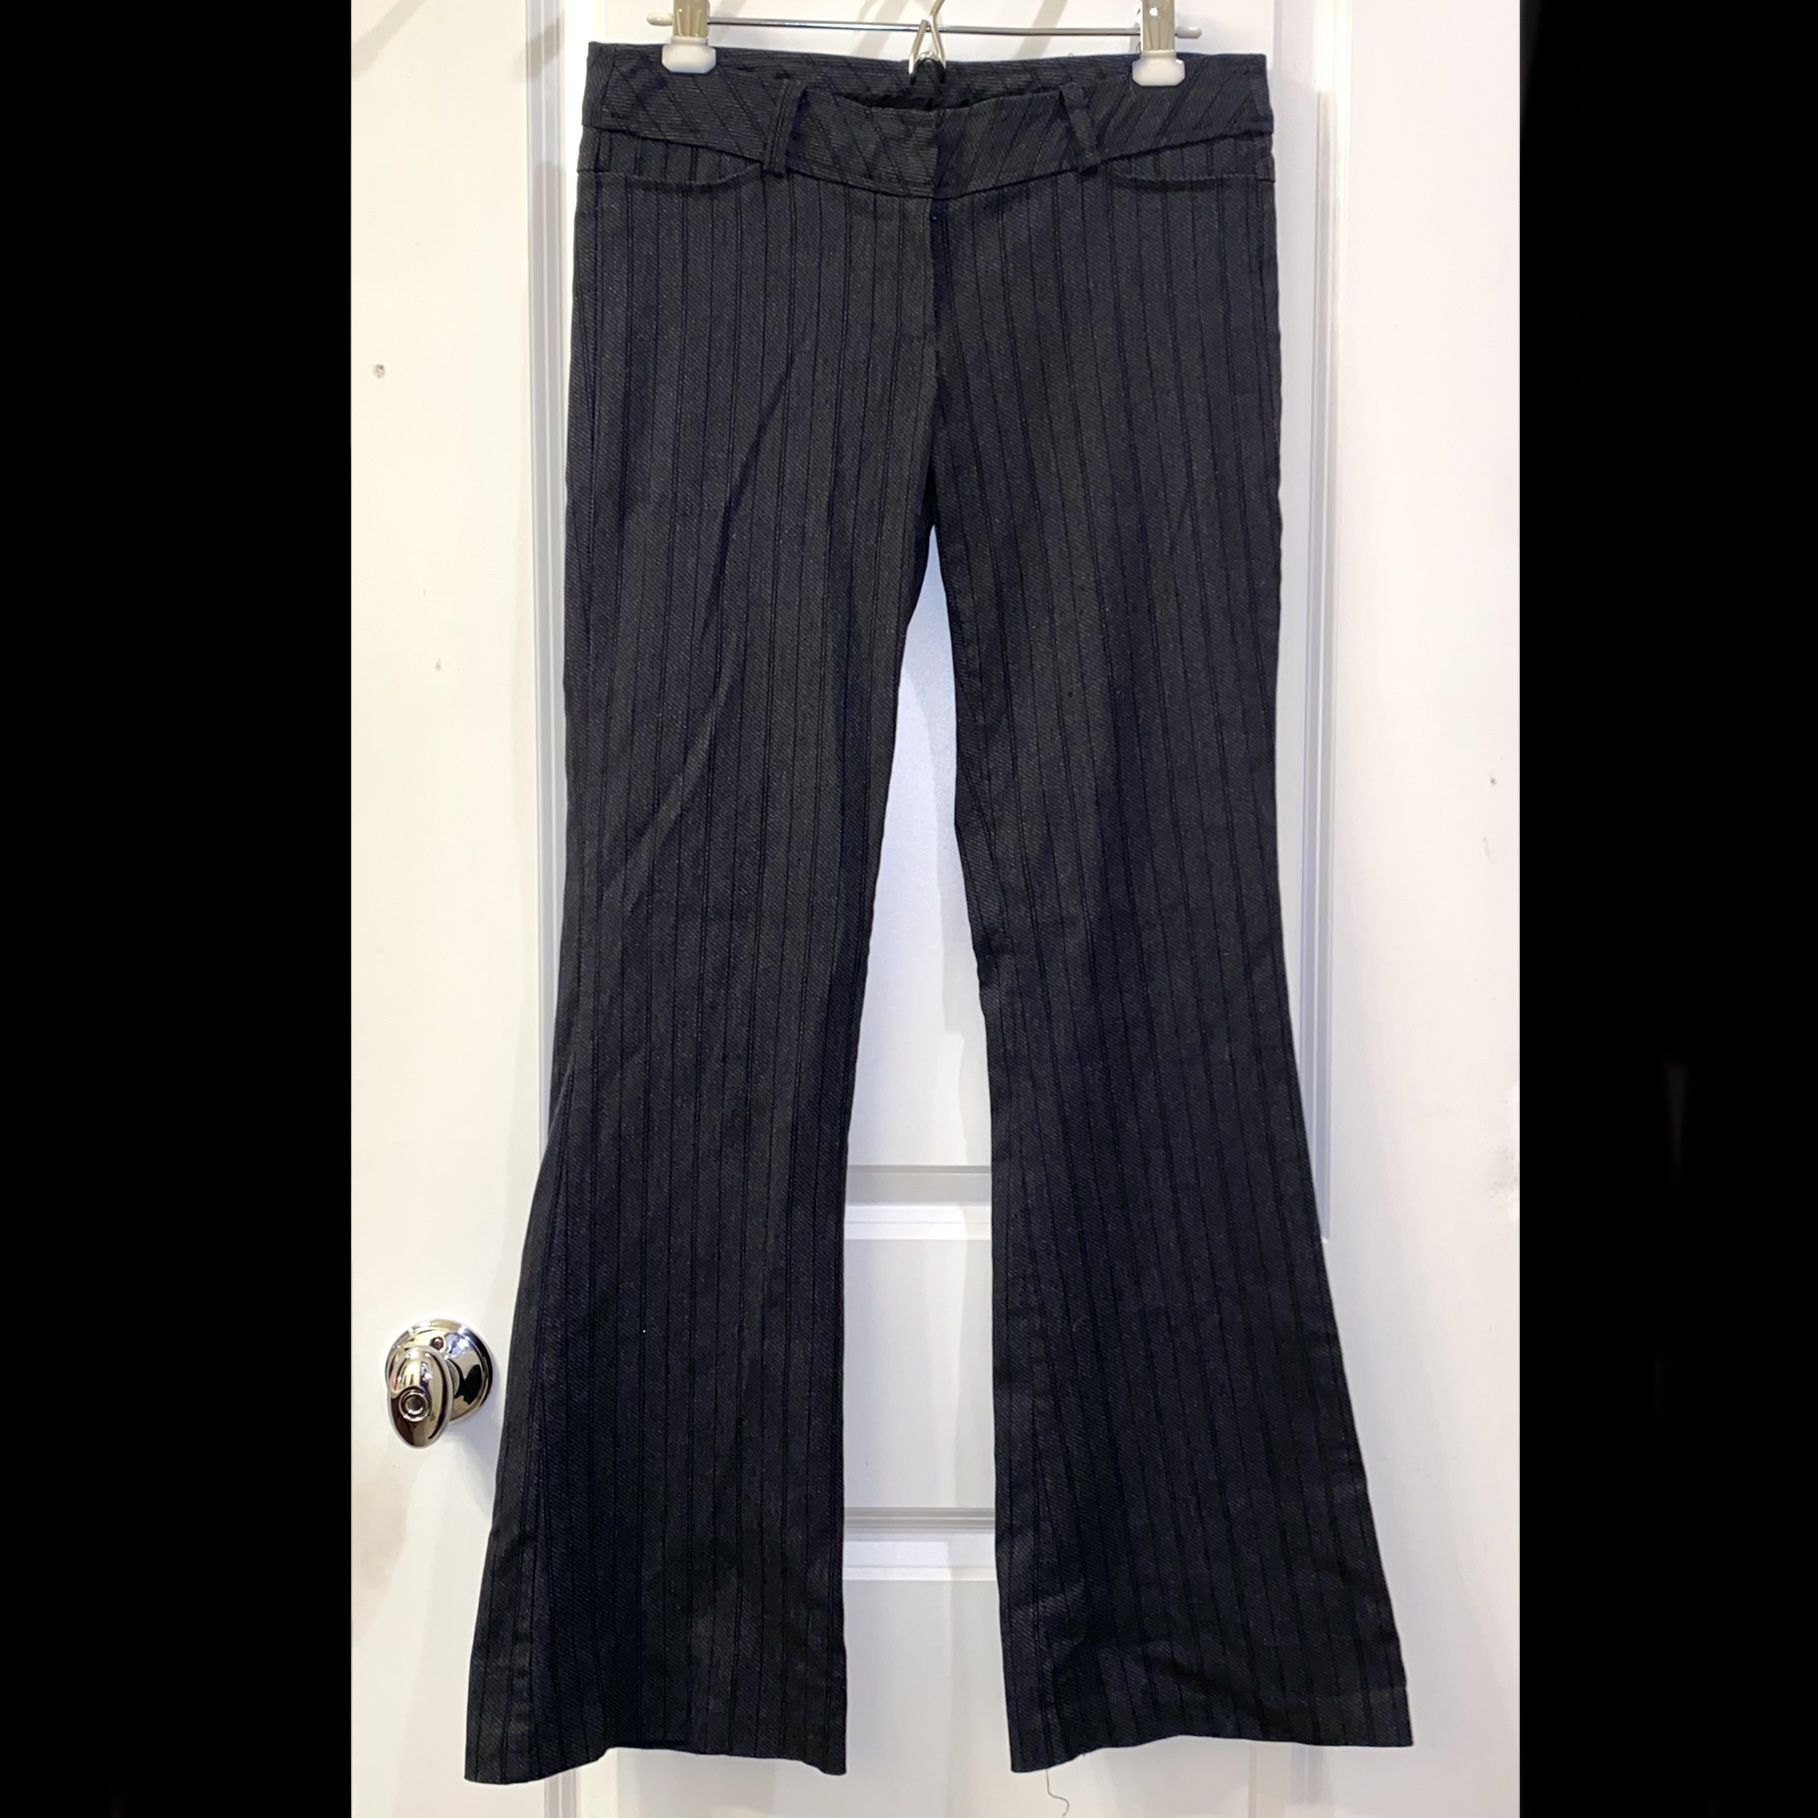 Women's Dress Work Black Grey Pants Cocktail Party New York City NYC Size Medium (US 8-10, Waist: 28" - 30"). Very nice pair of bottoms for anyone